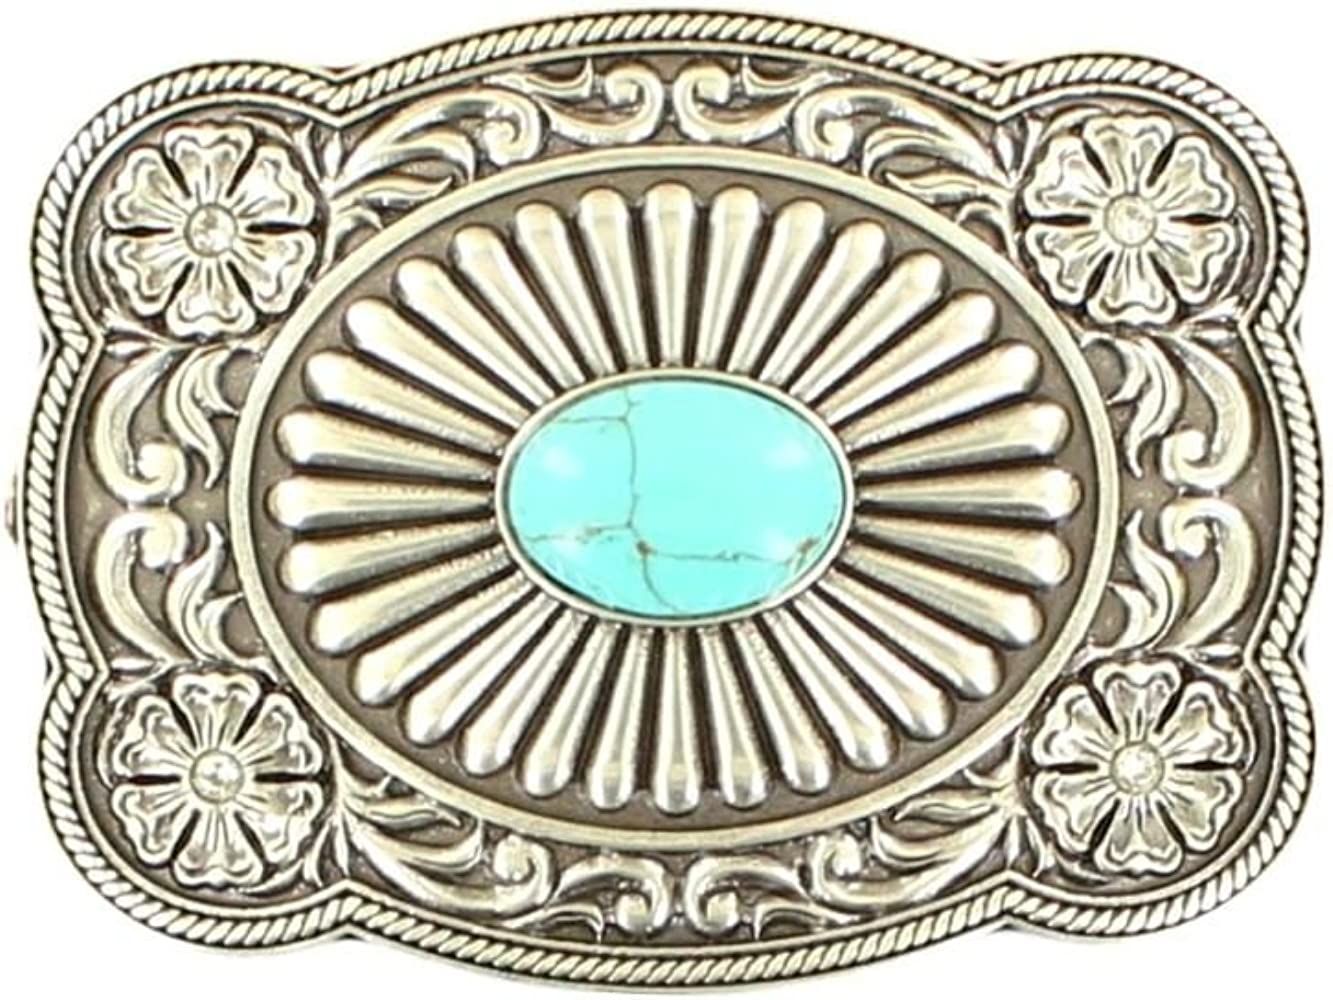 M&F Western Women's Scallop Edged Rectangle Buckle, Silver/Turquoise, One Size | Amazon (US)